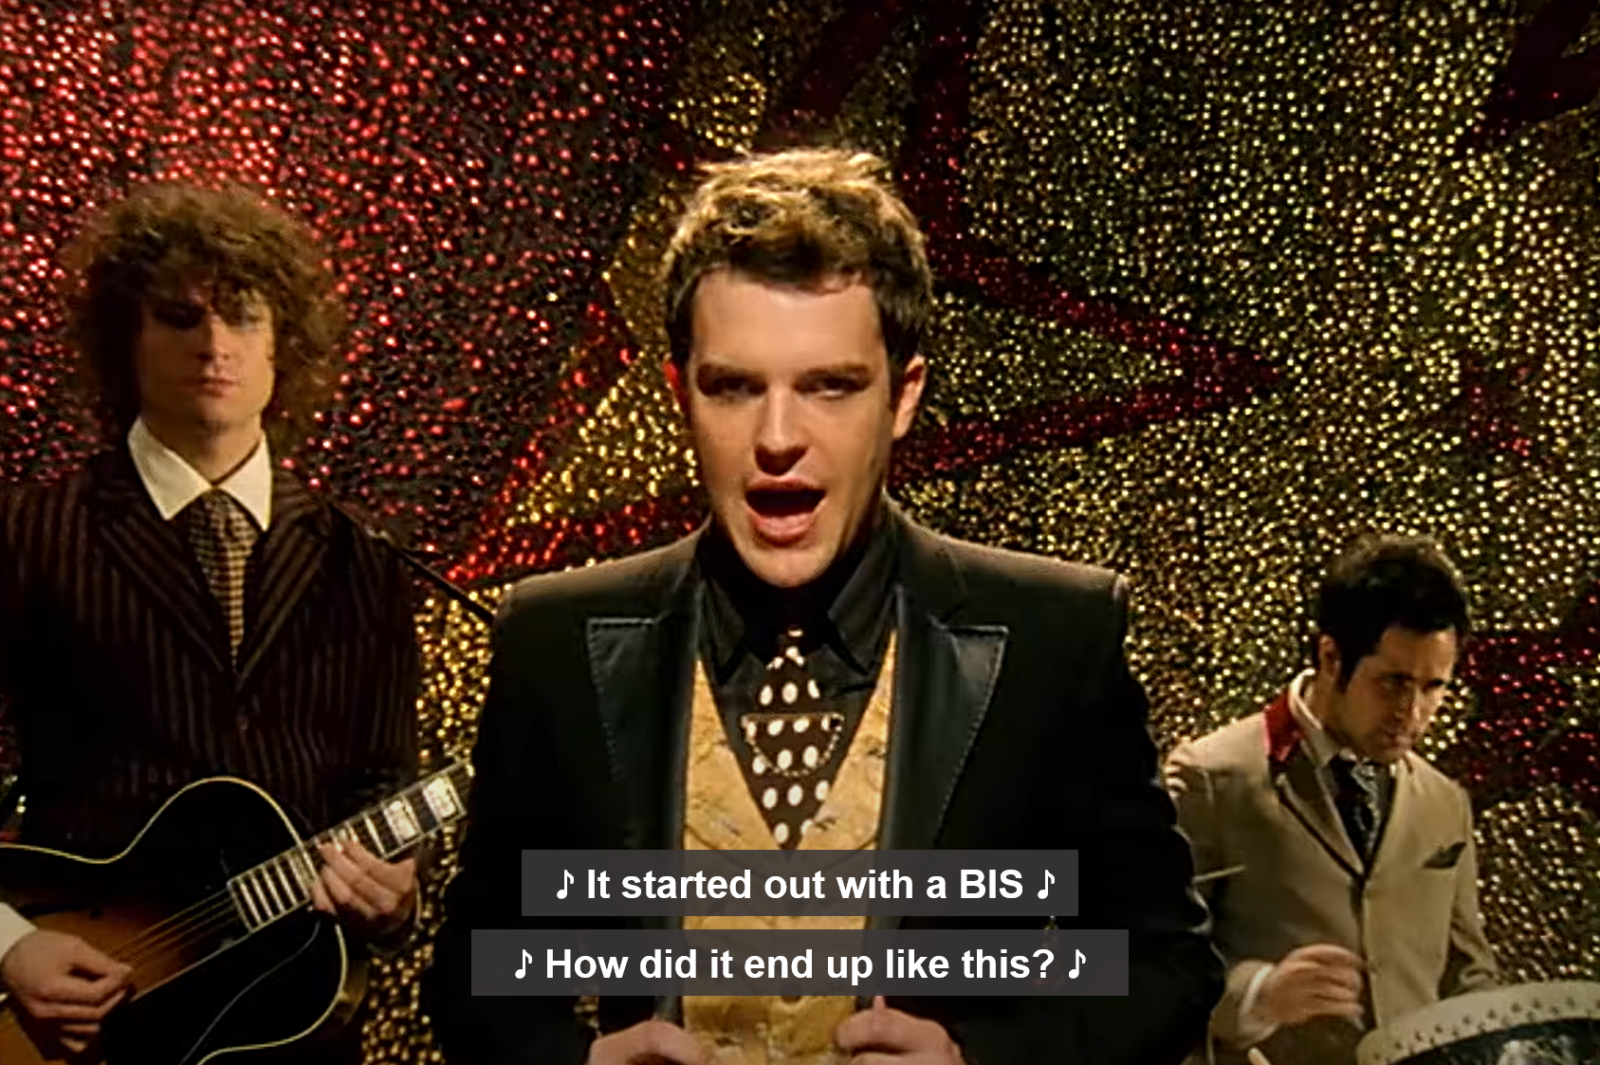 Mr Brightside: It started out with a BIS, how did it end up like this?